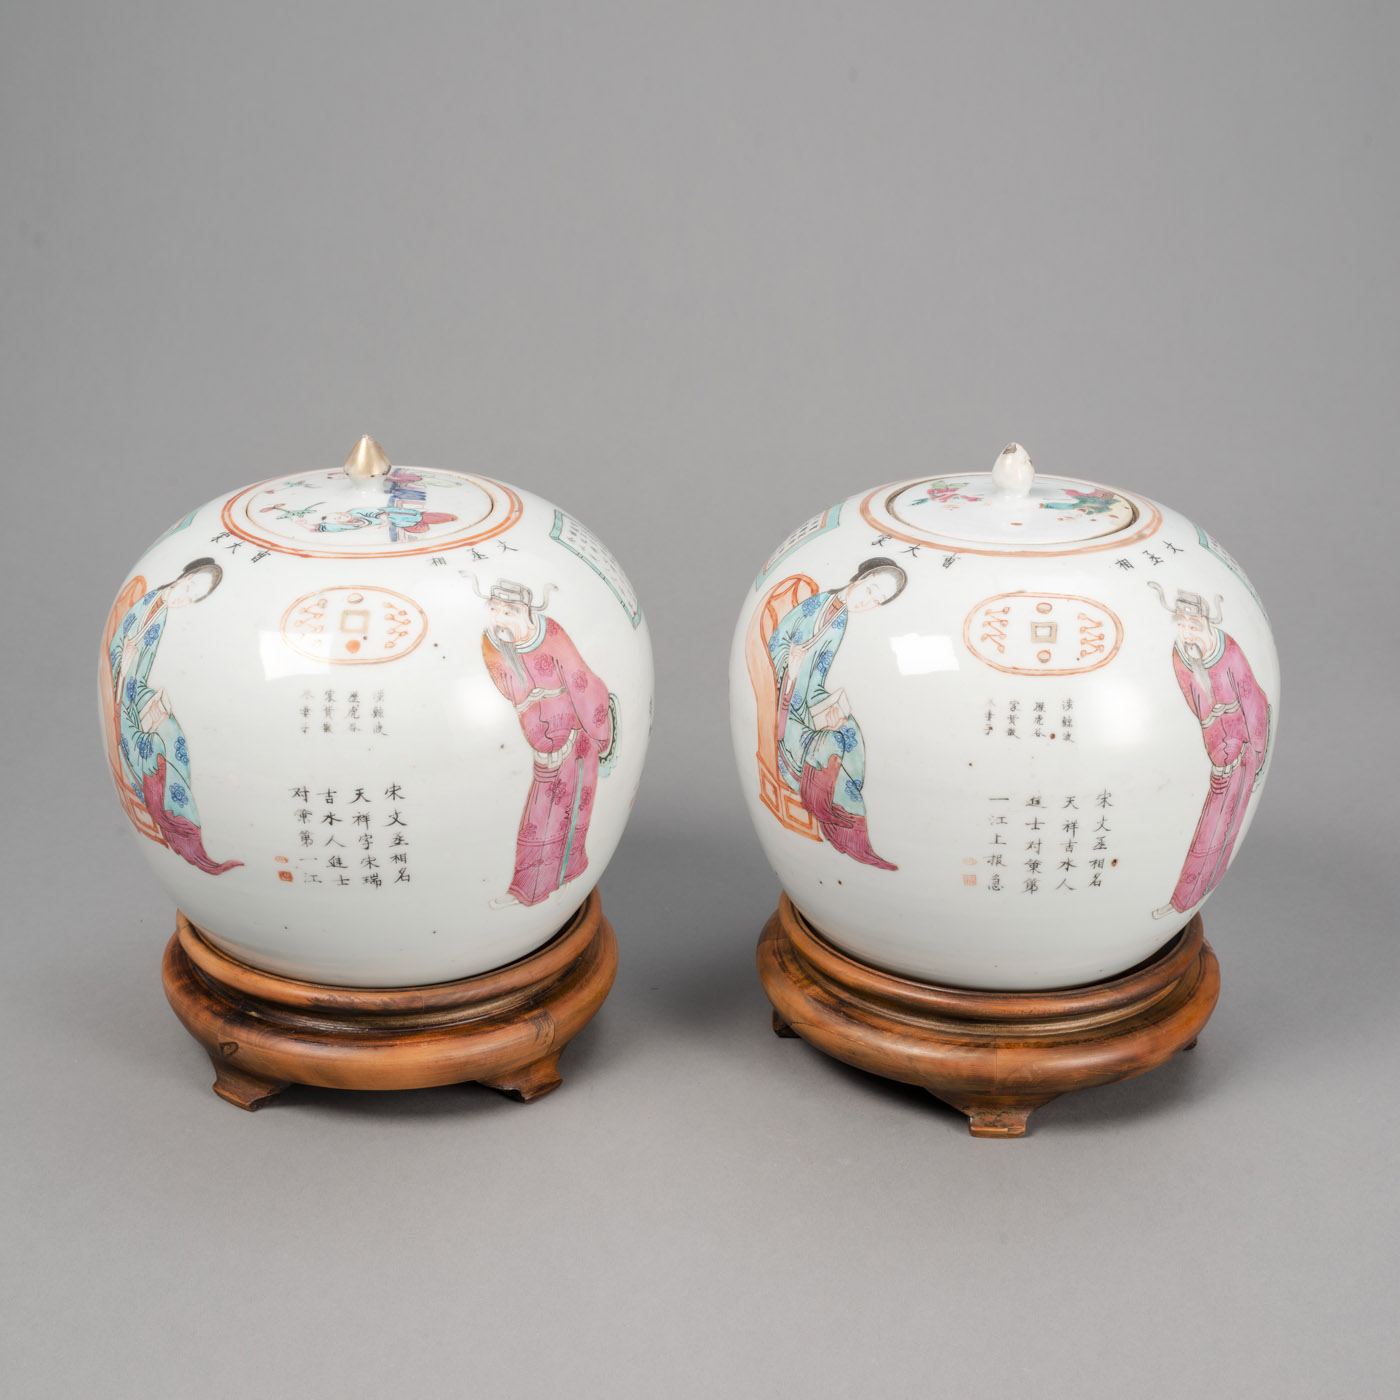 <b>A PAIR OF 'FAMILLE ROSE' 'WU SHUANG PU' VASES WITH COVERS</b>